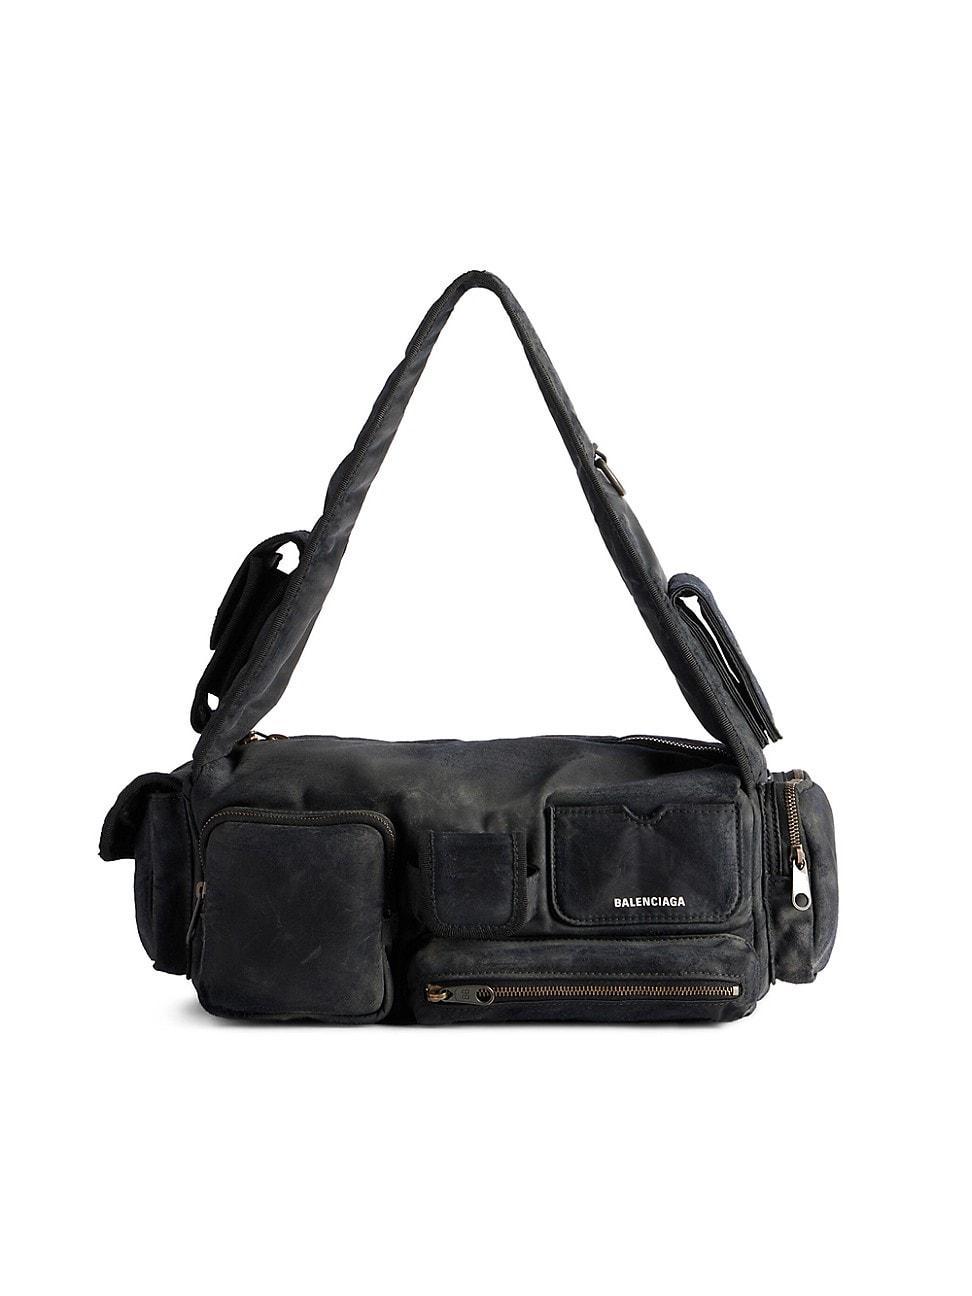 Womens Superbusy Small Sling Bag Product Image